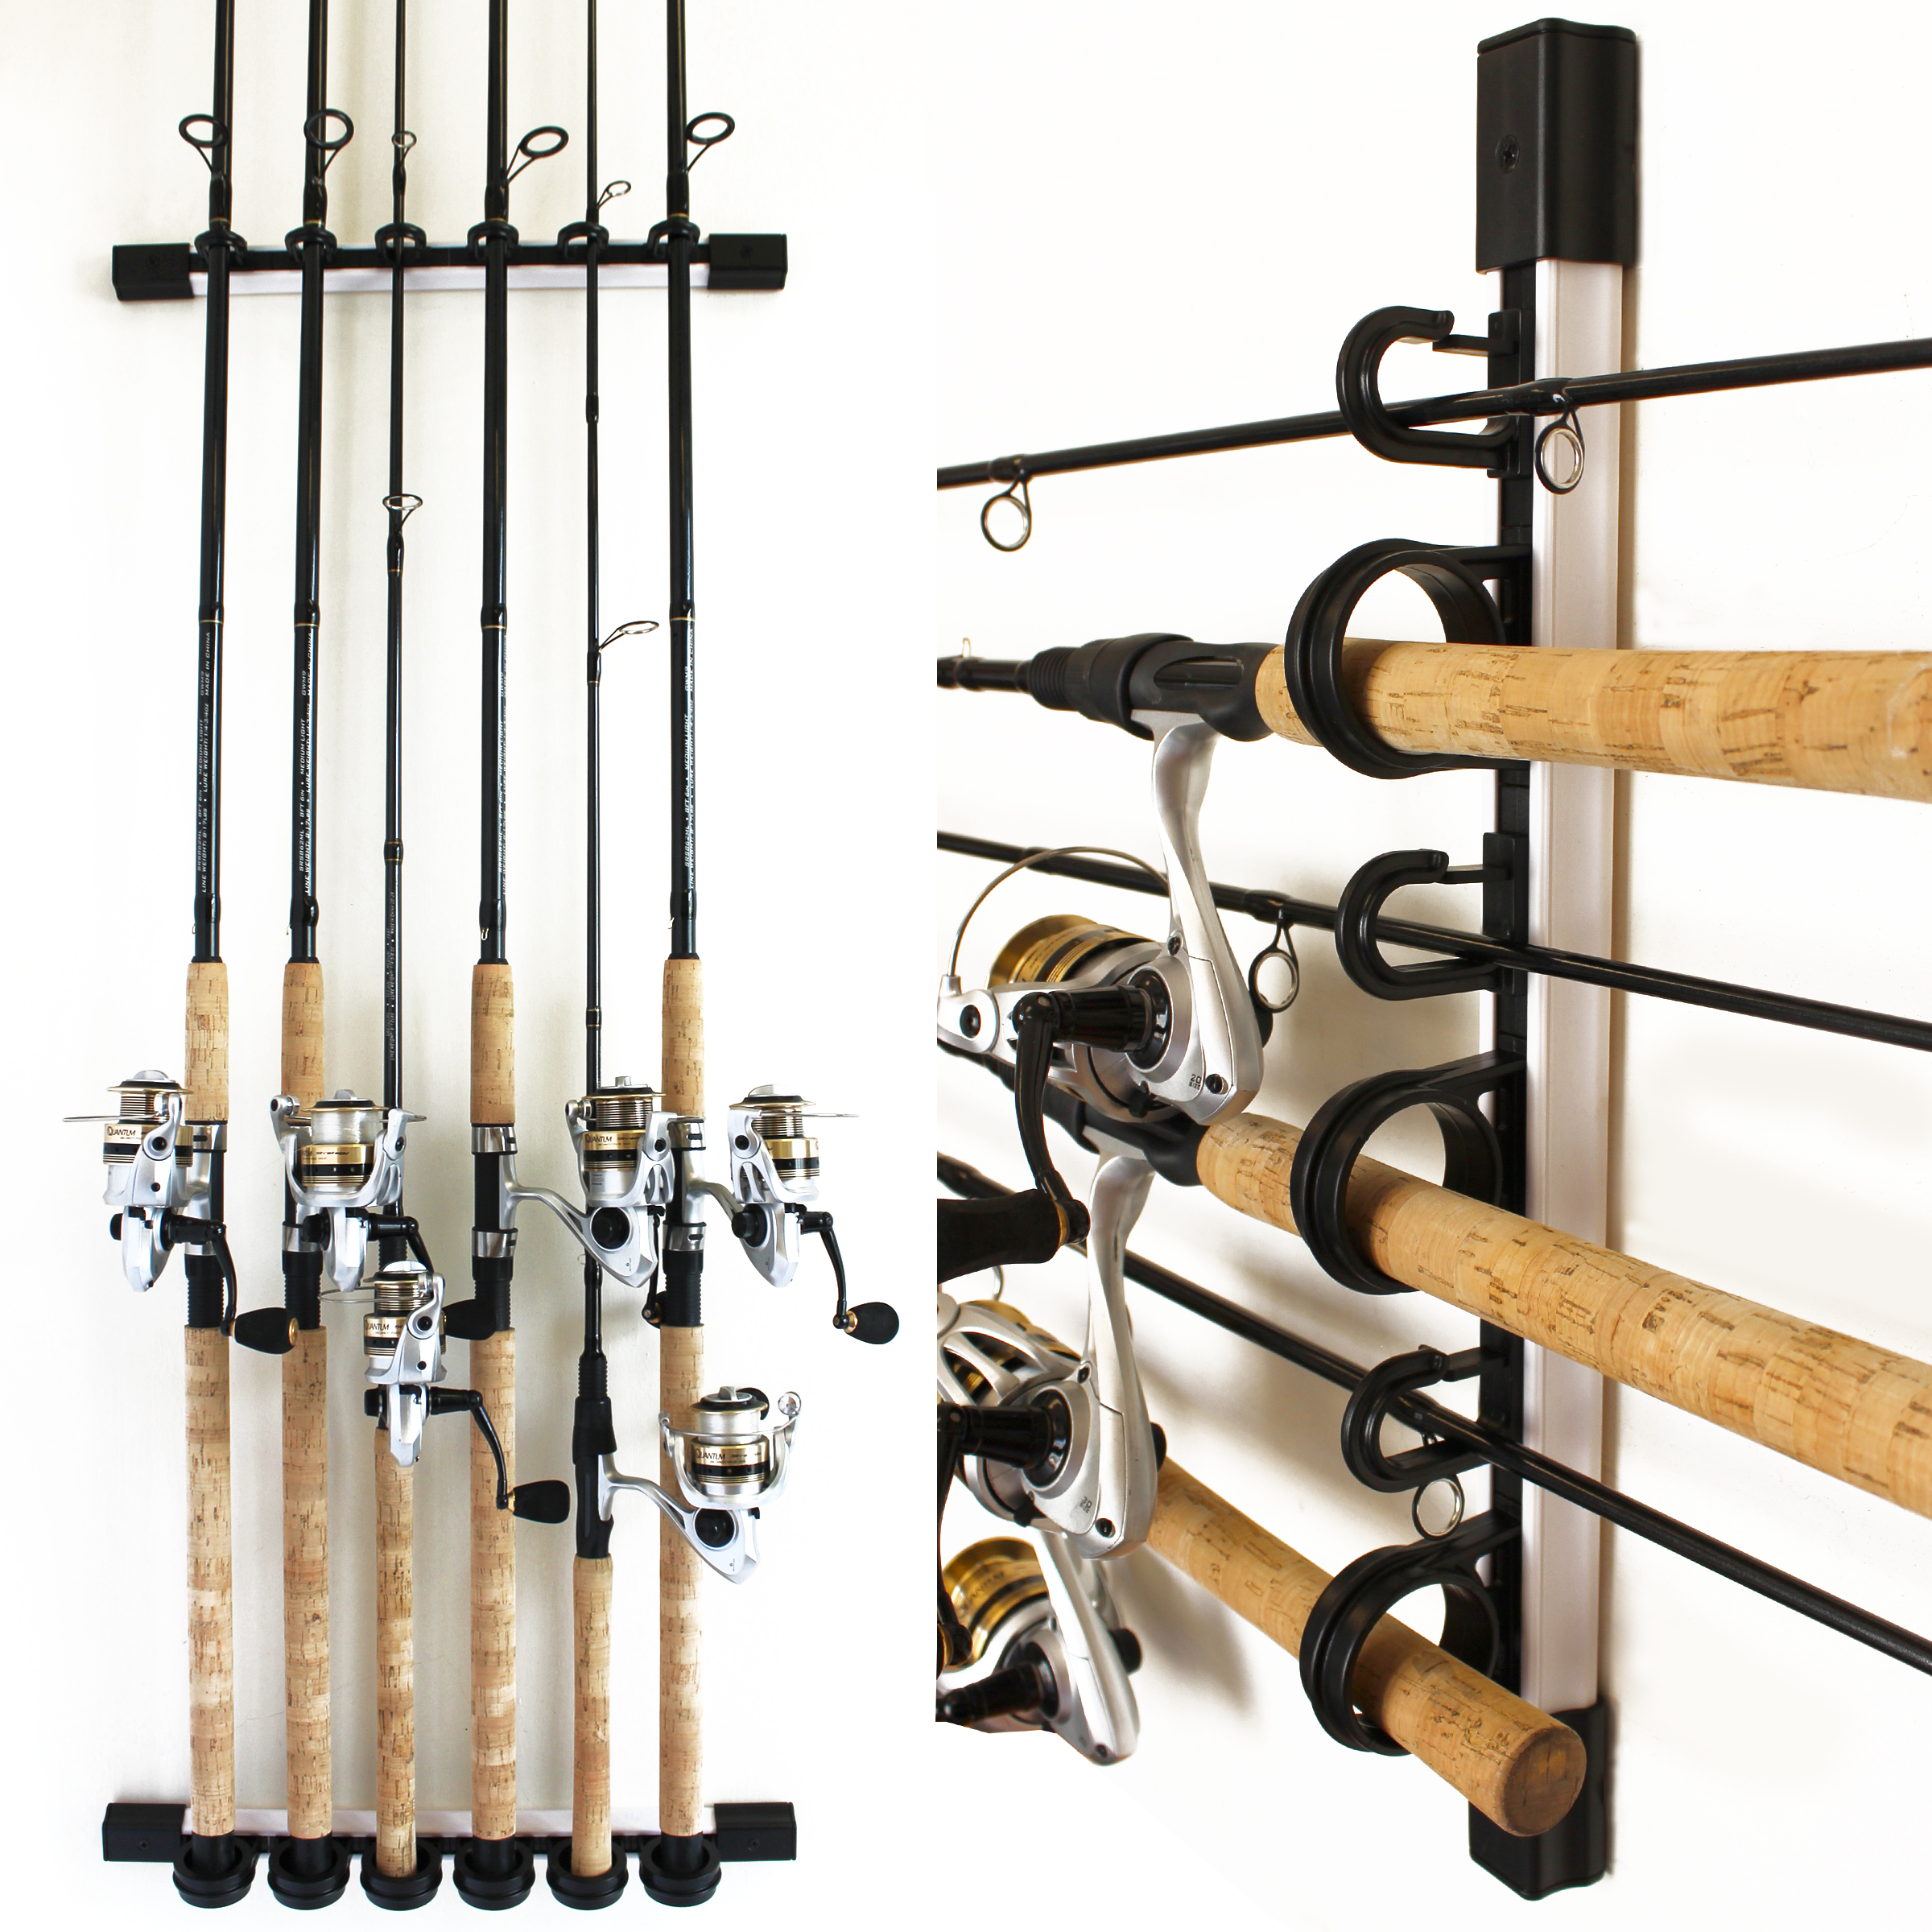 6 Fishing Rod Rack Vertical Holder Horizontal Wall Mount Boat Pole Stand  Storage